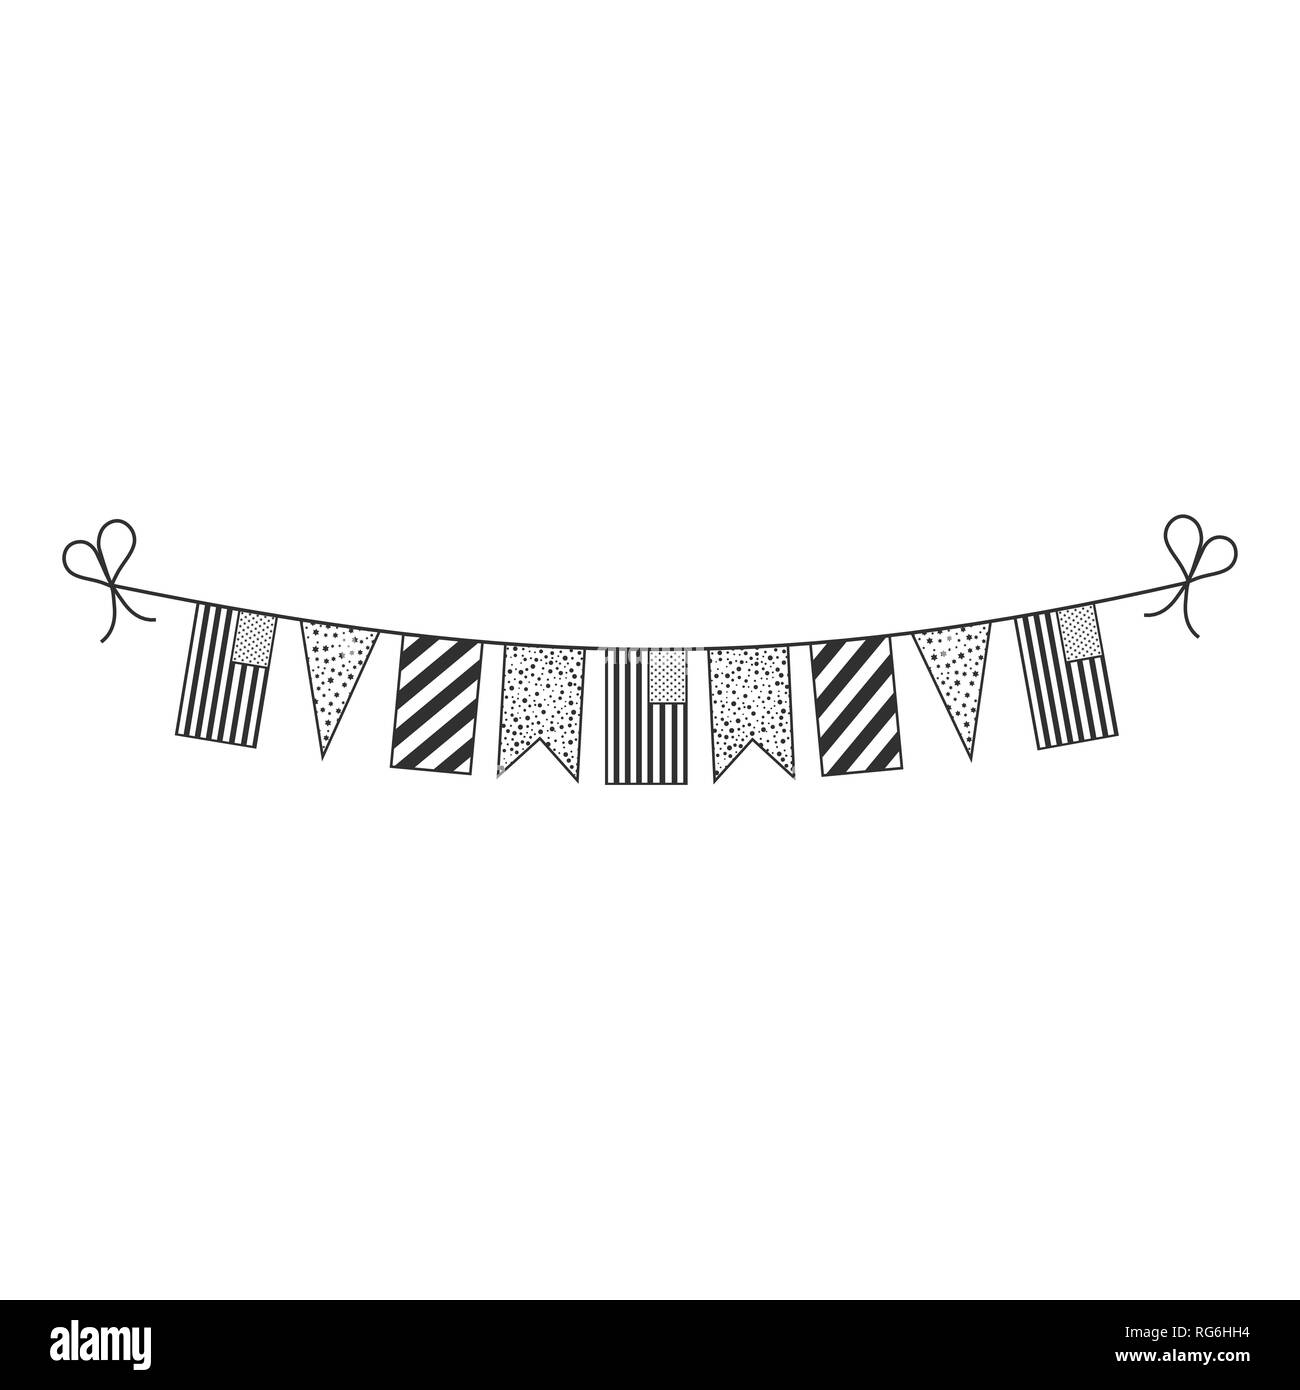 Decorations bunting flags for United States national day holiday in black outline flat design. Independence day or National day holiday concept. Stock Vector